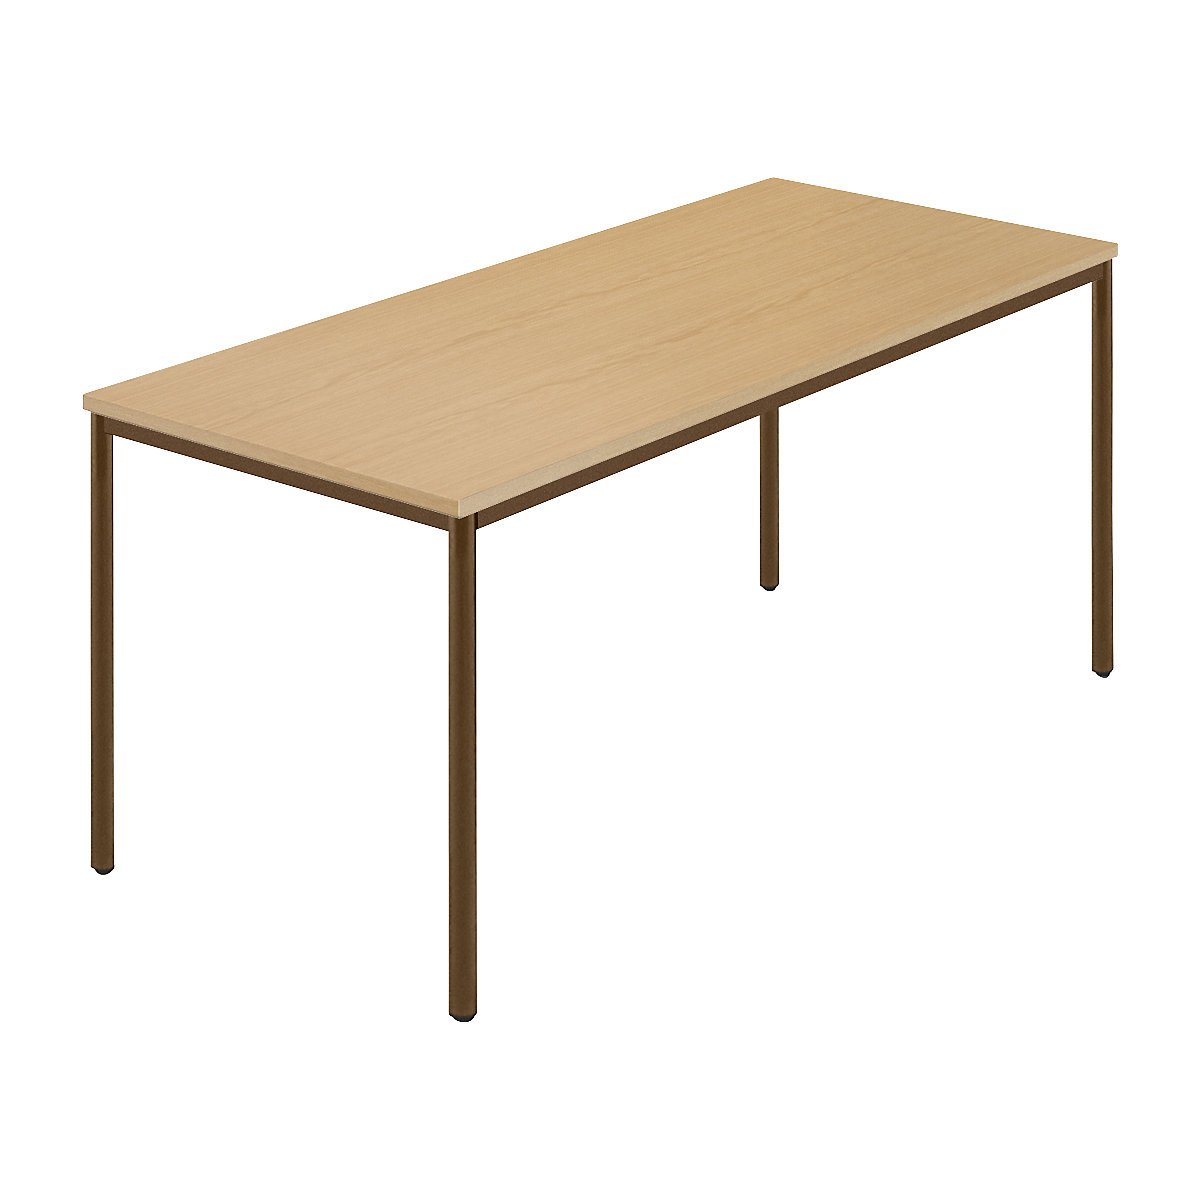 Rectangular table, coated round tubing, WxD 1600 x 800 mm, beech natural / brown-6